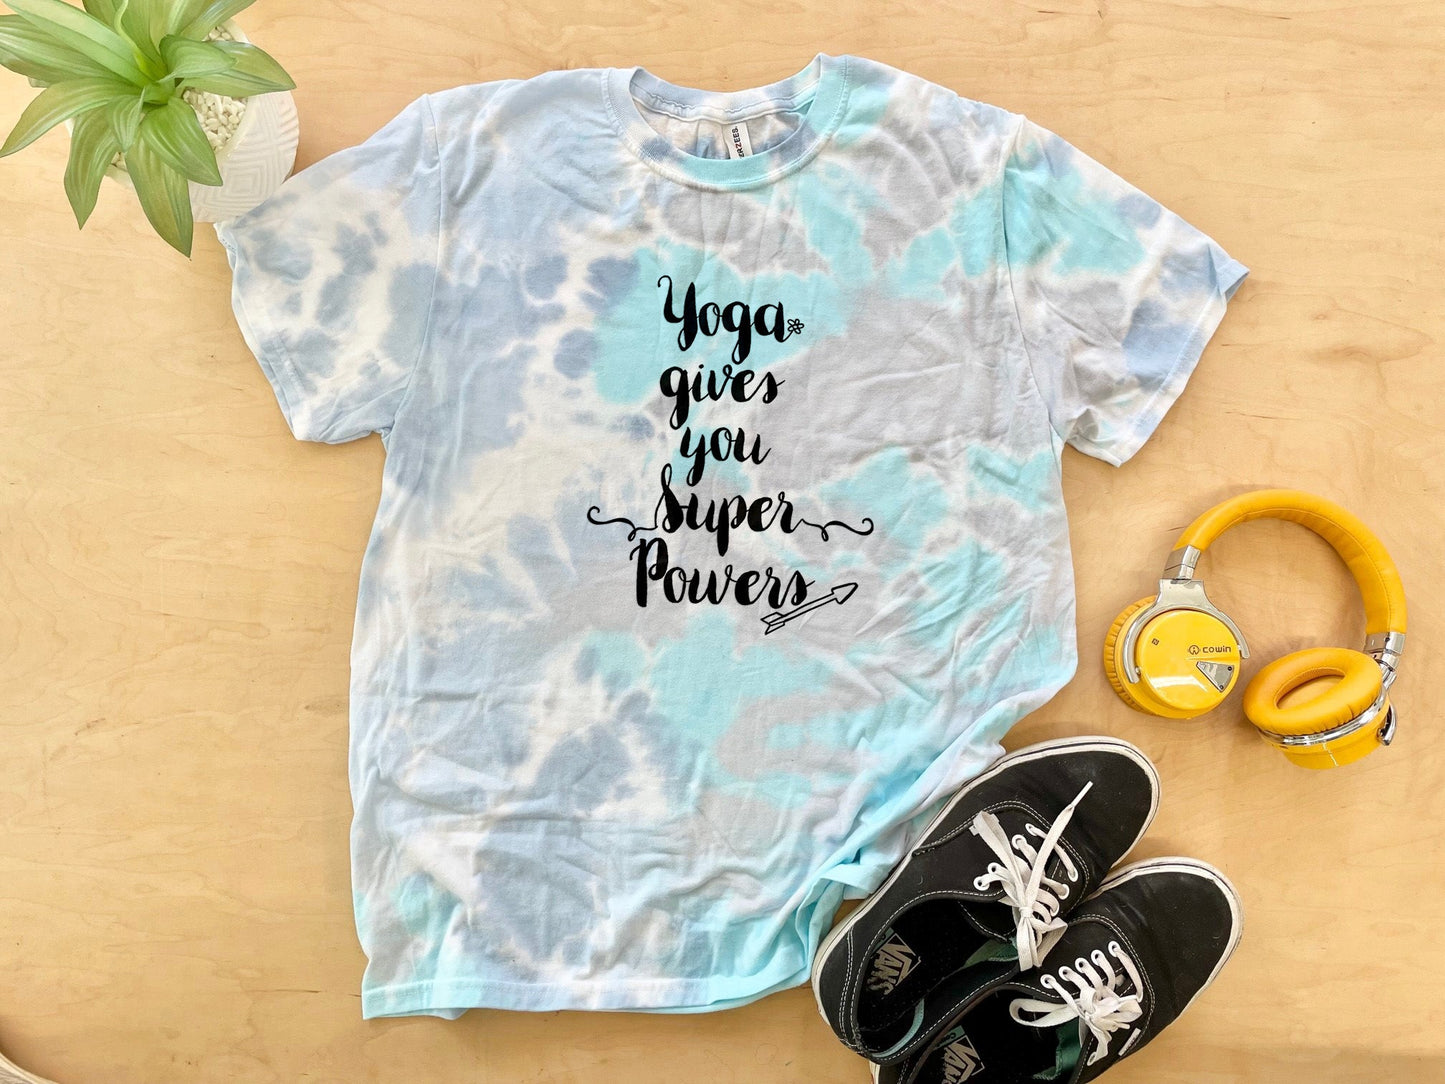 Yoga Gives You Superpowers - Mens/Unisex Tie Dye Tee - Blue